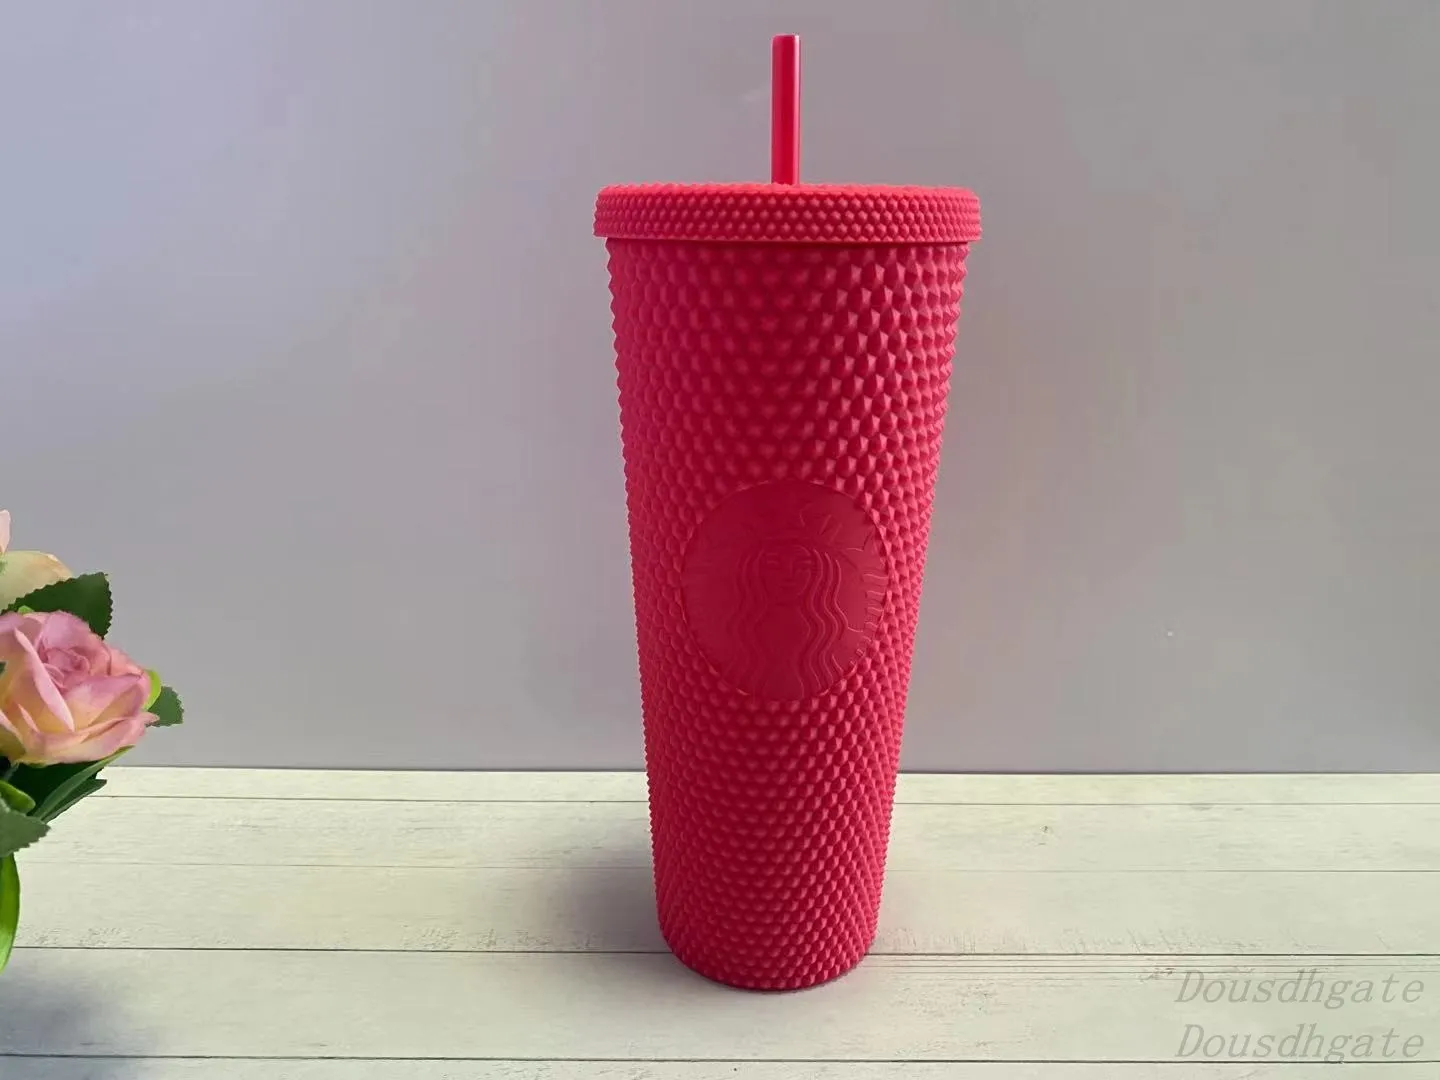 Starbucks Double Pink Durian Laser Straw Cups 710ML Tumblers Mermaid Plastic Cold Water Coffee Cup Gift Mugs211w